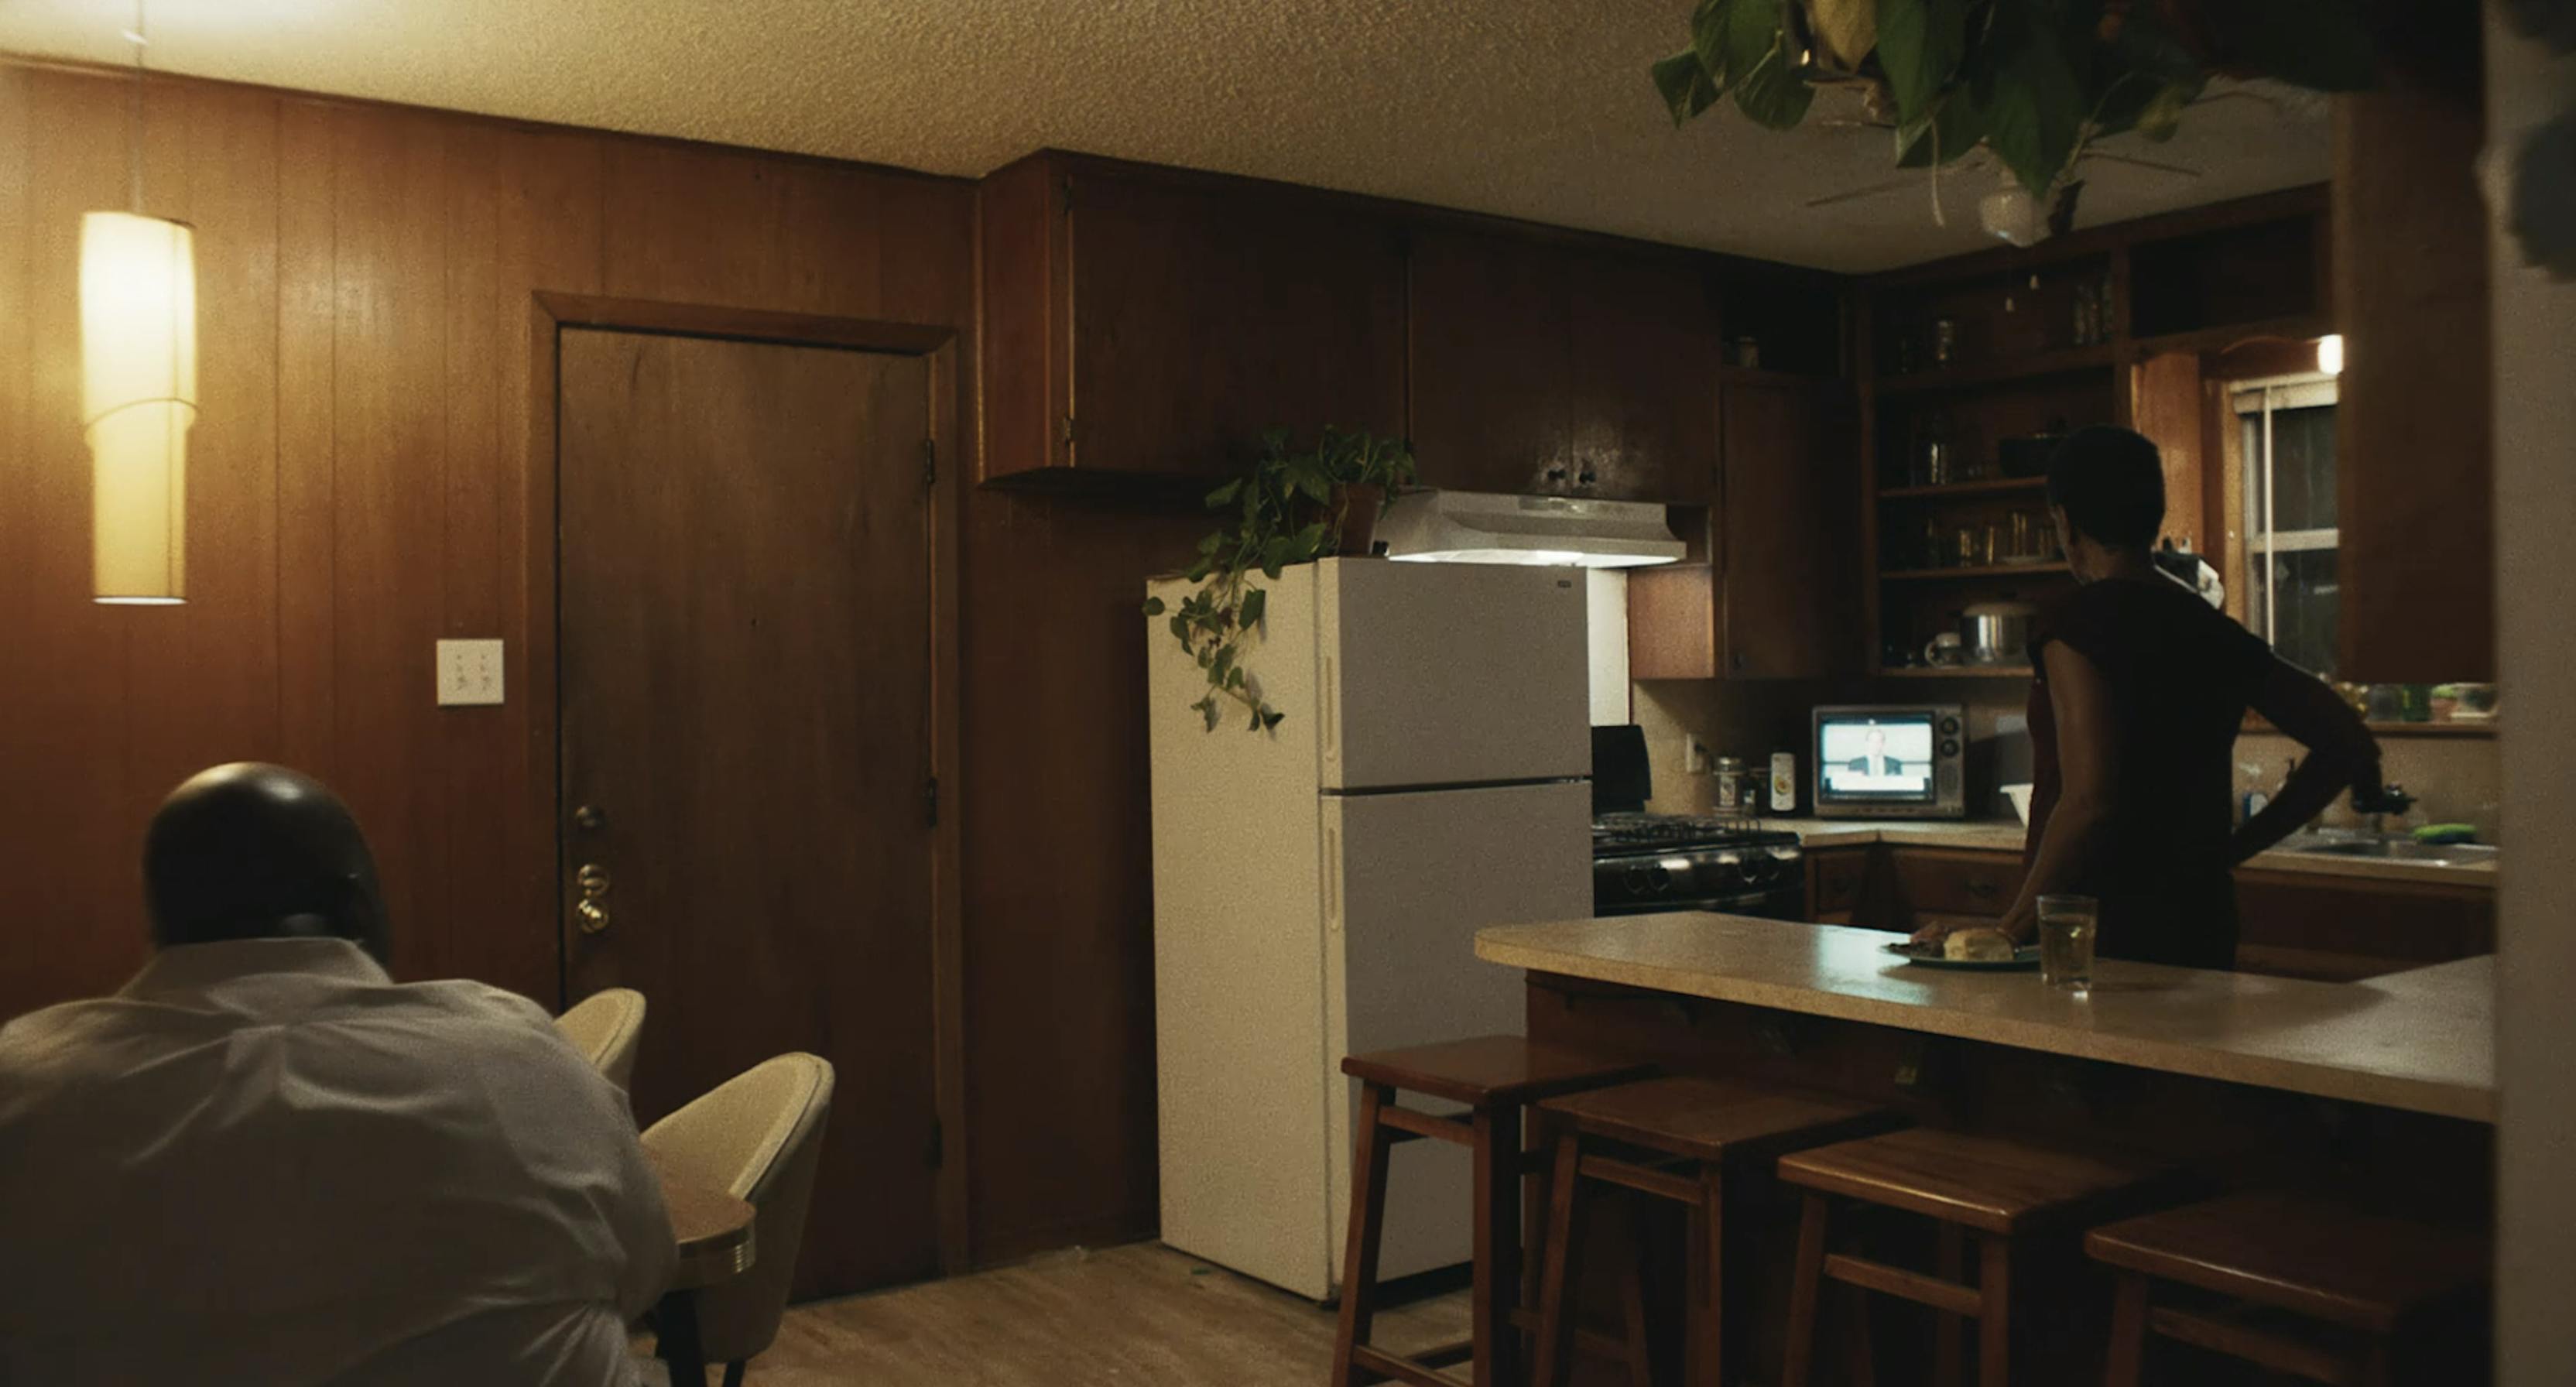 A kitchen with wood paneling and an old refrigerator